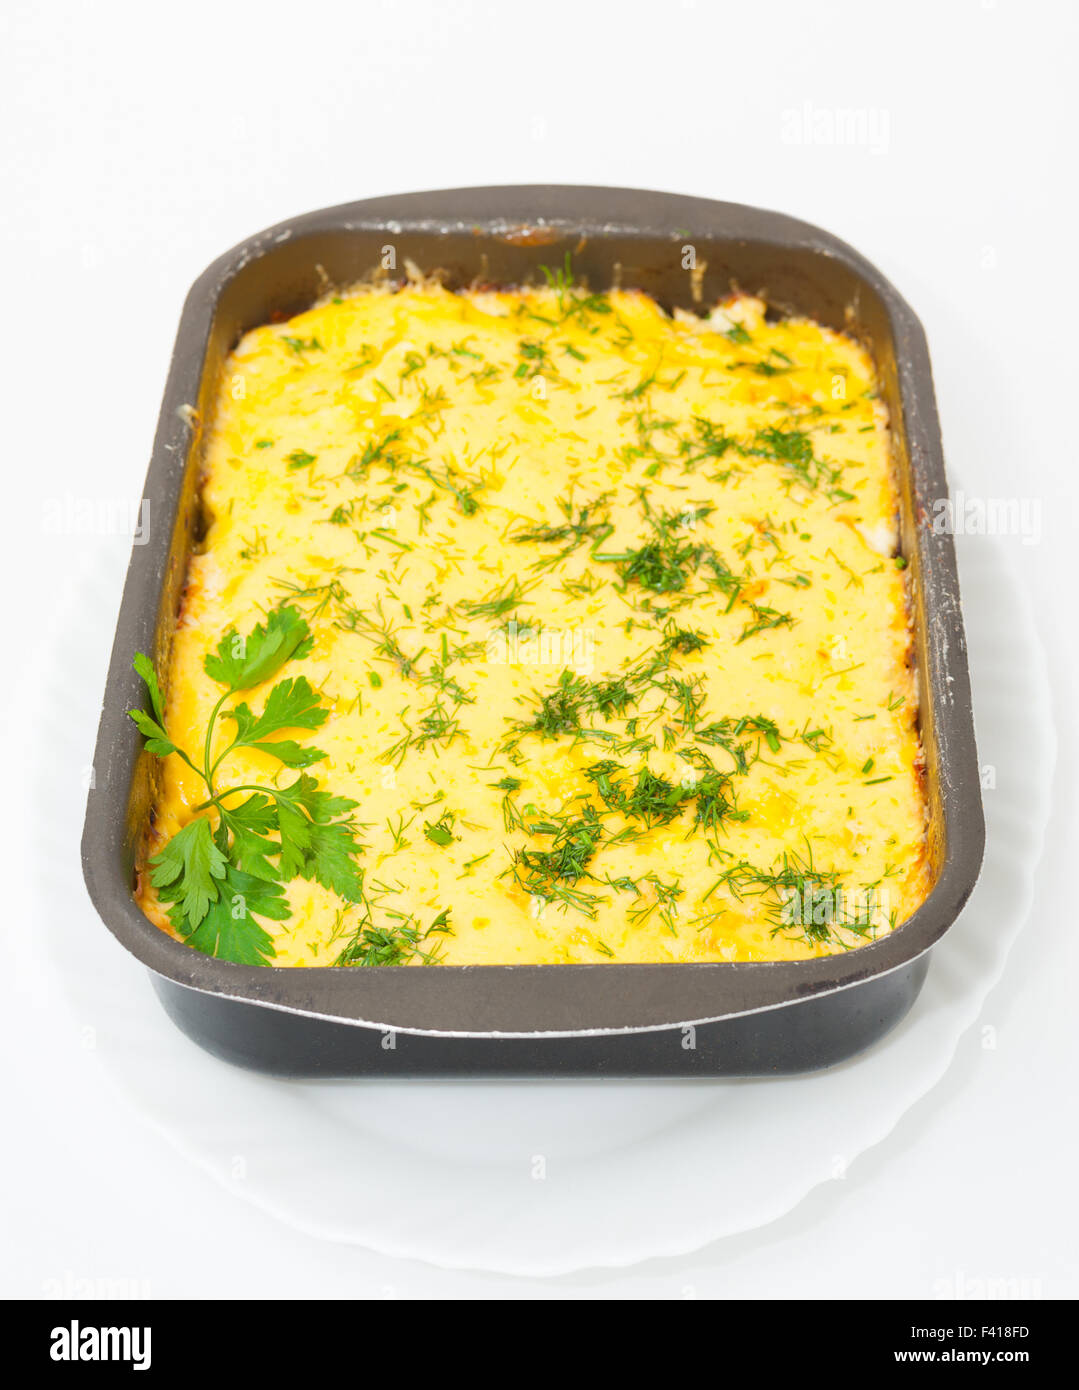 meat baked under cheese Stock Photo